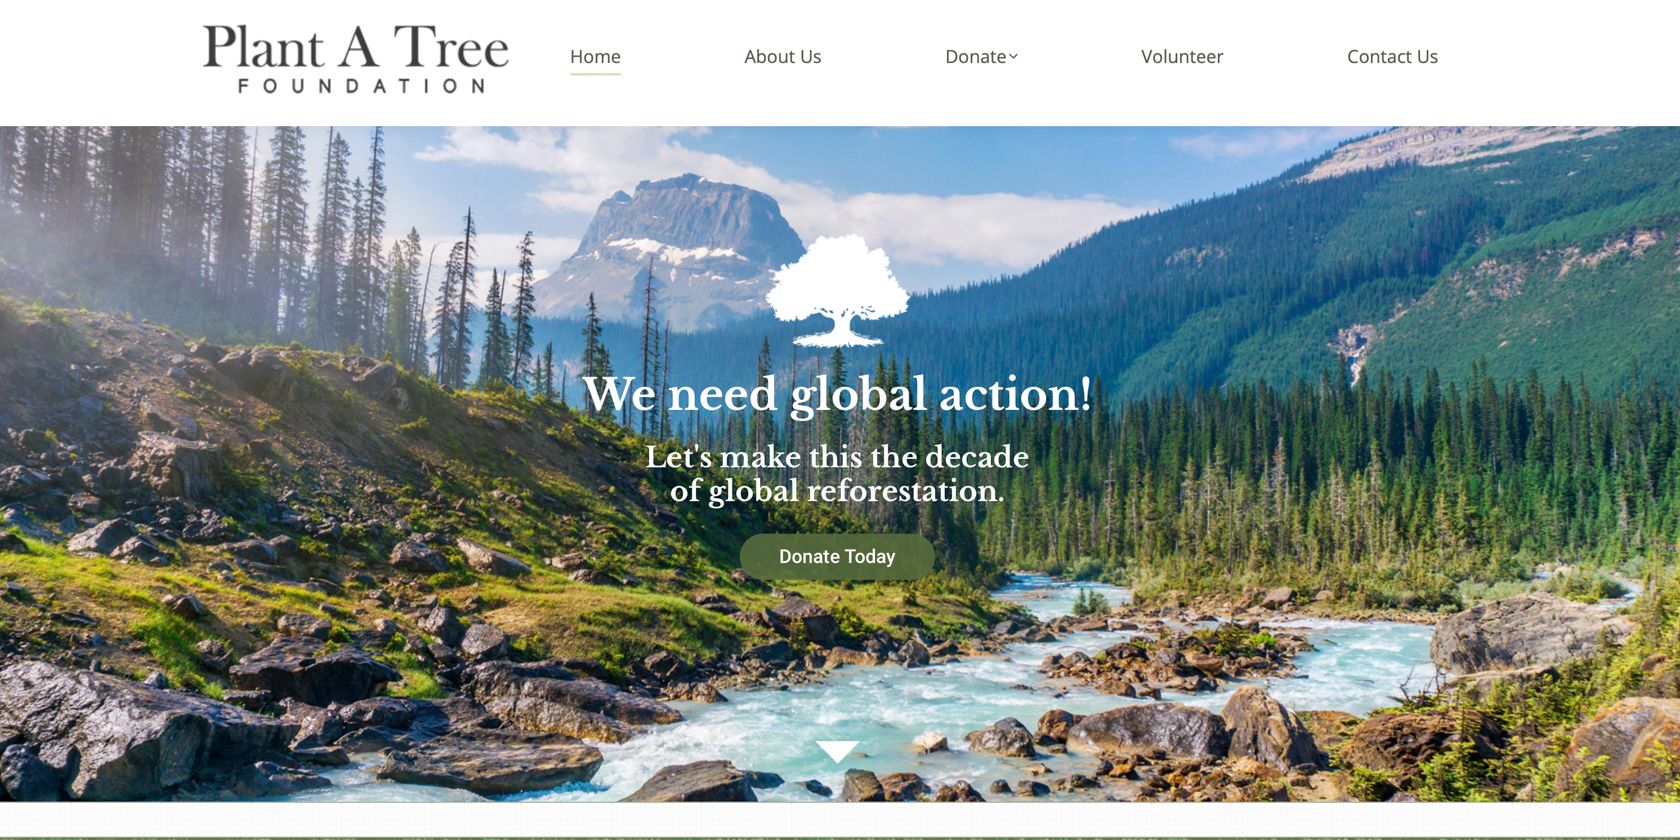 Screenshot showing home page of the Plant a Tree Foundation